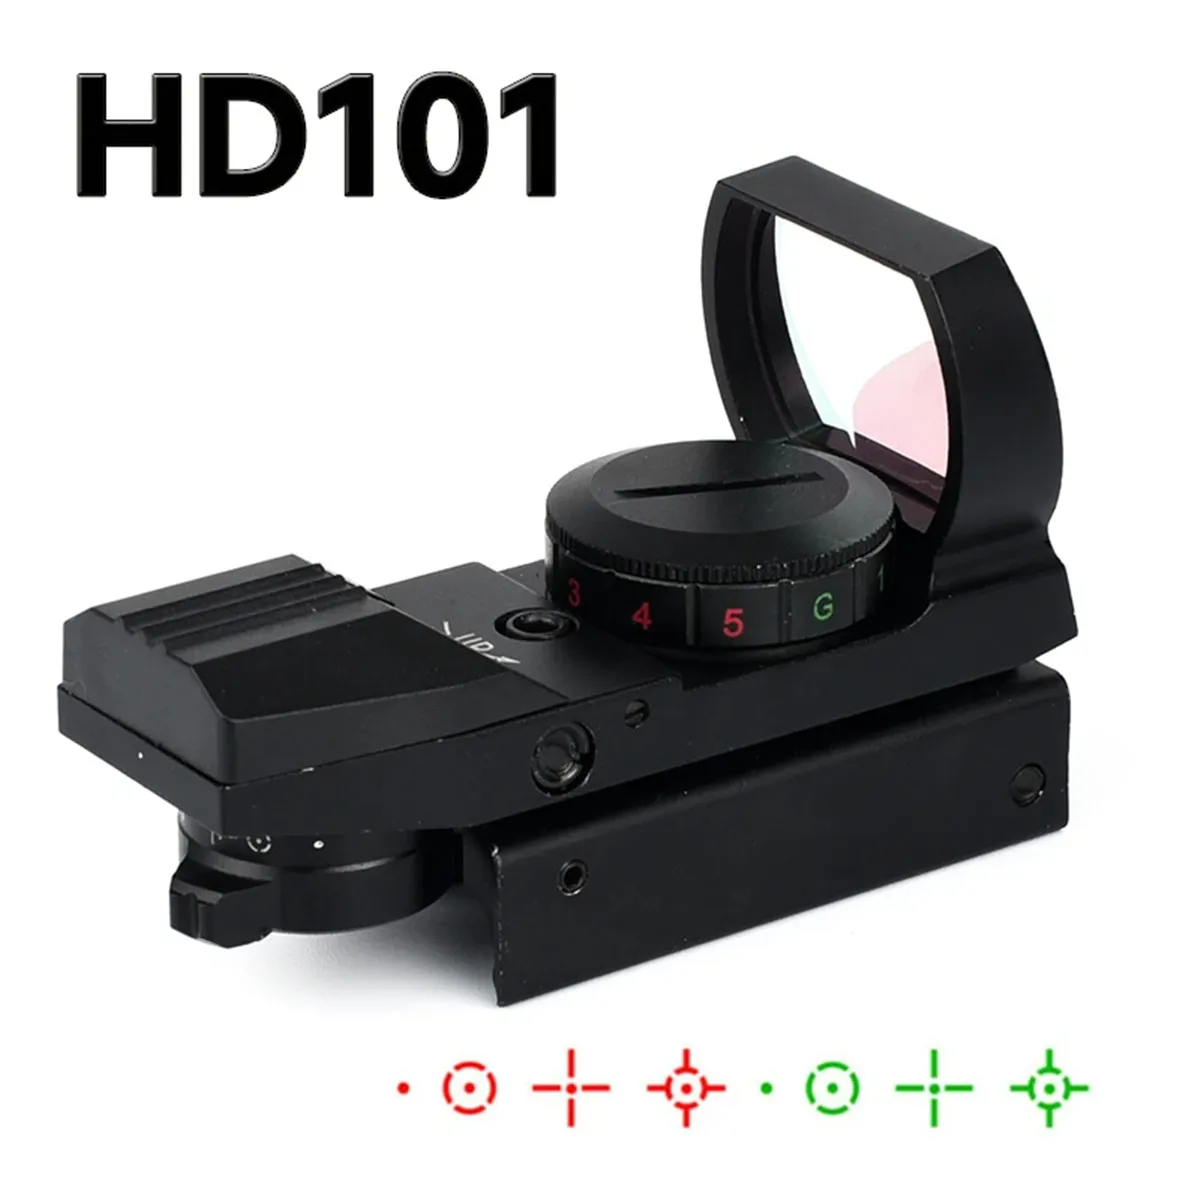 

HD101 Red Dot Sight Holographic Hunting Riflescope Reflex 4 Reticle Tactical Optics Scope Fits 20mm Rail for Air Gun